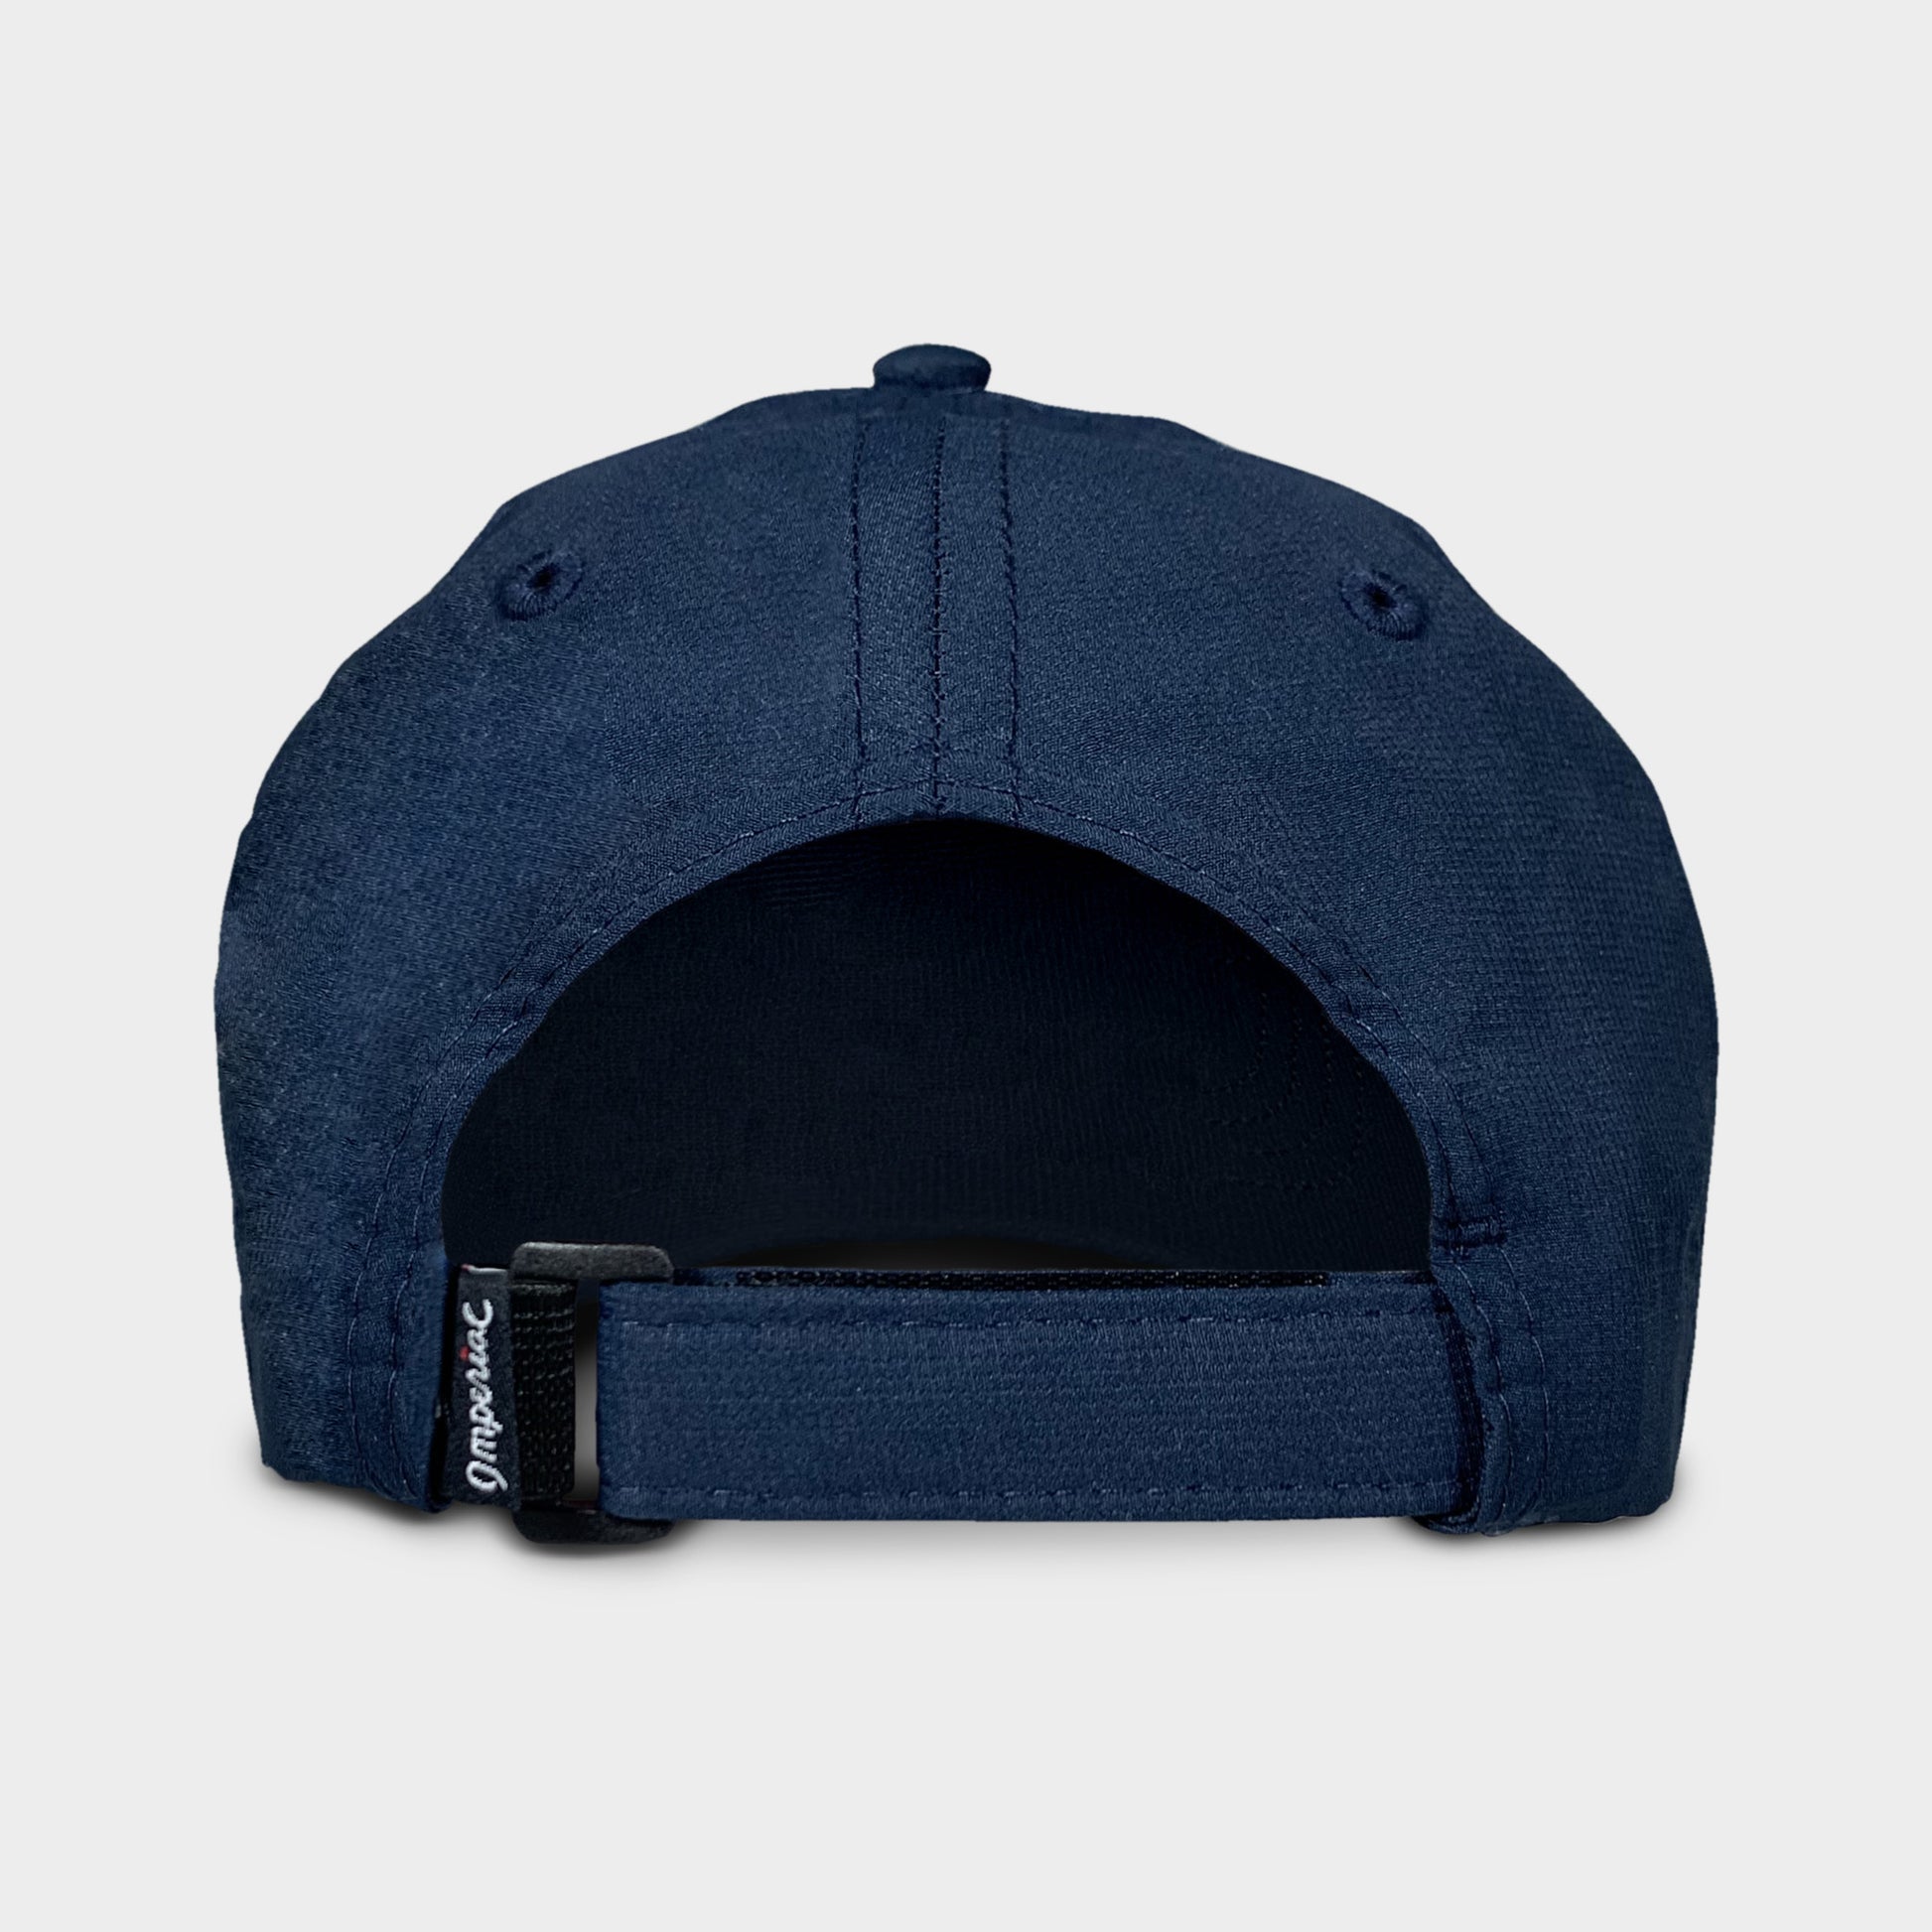 back view of navy blue MadGolfer baseball hat with adjustable strap